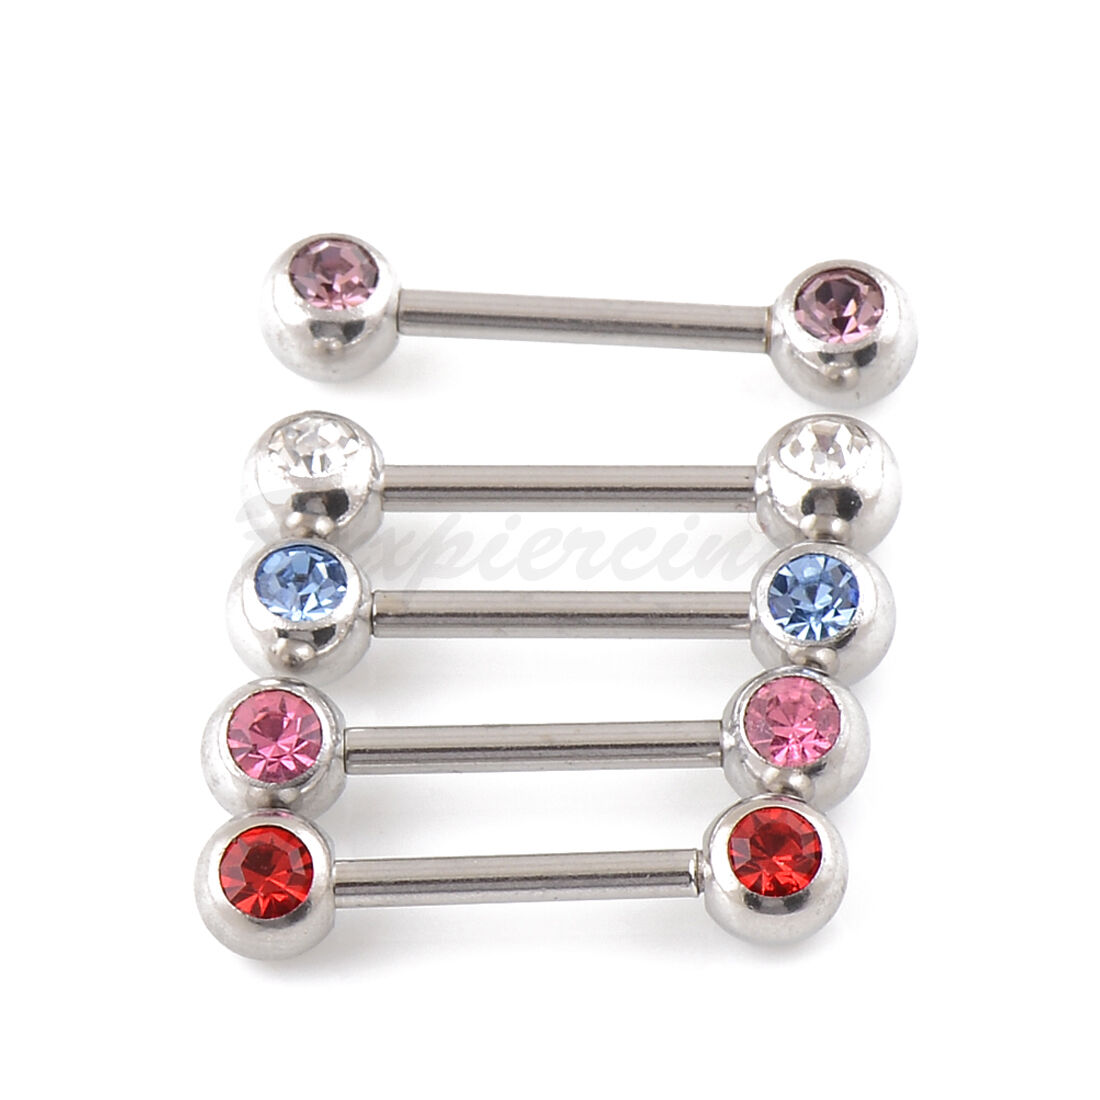 10 pcs 14G 12mm (1/2") Double 5mm Gem Tongue Barbell Surgical Steel Nipple Ring Bxxpiercings